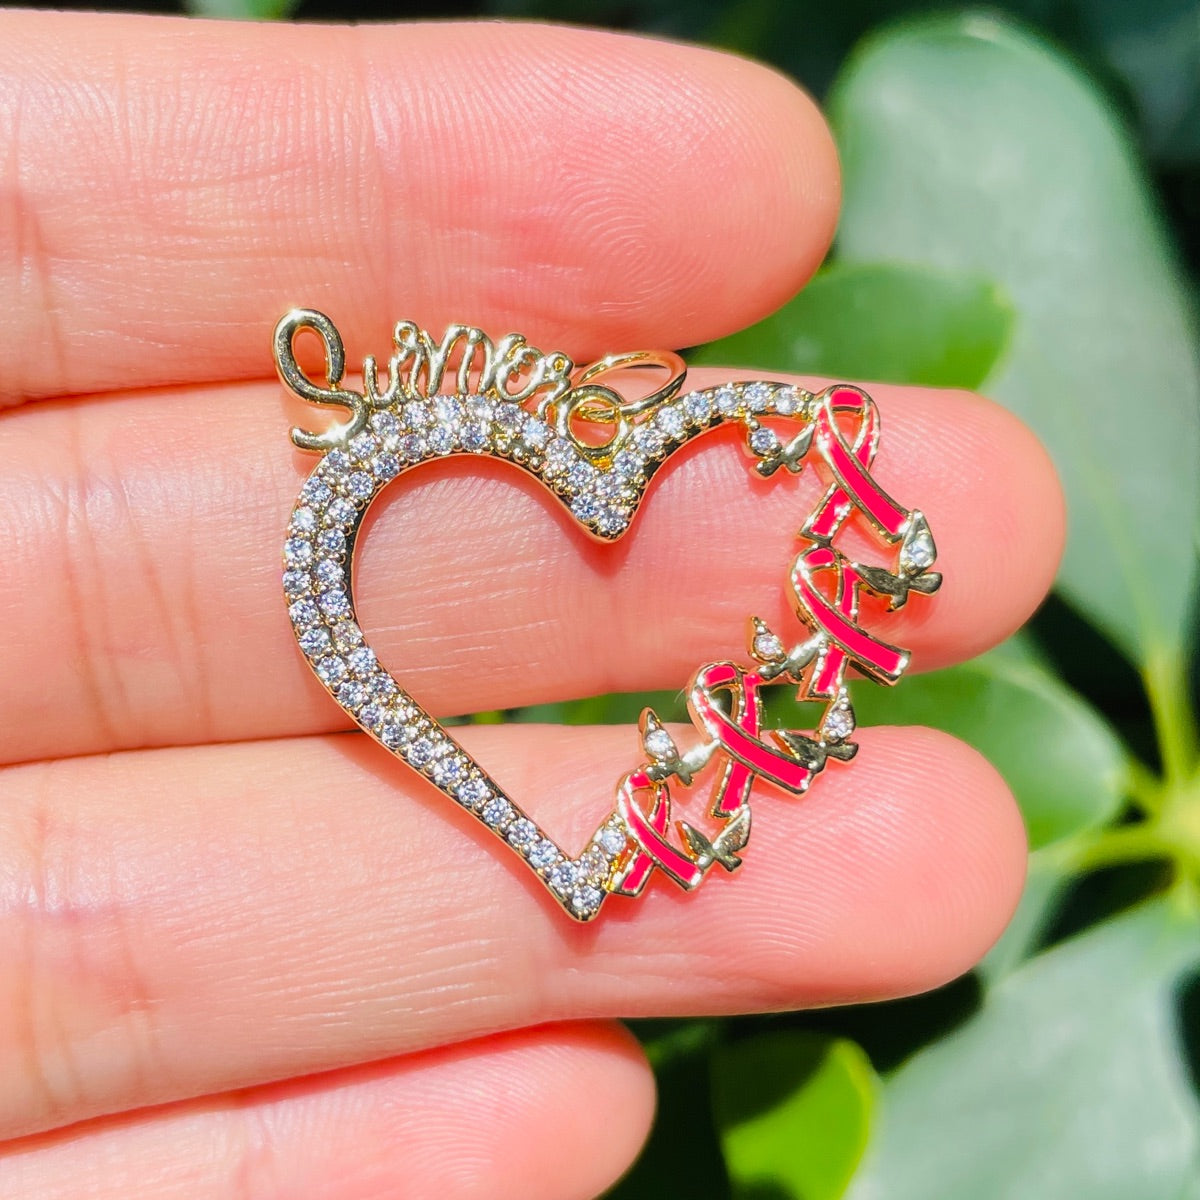 10pcs/lot CZ Pave Pink Ribbon Survivor Heart Charms - Breast Cancer Awareness Gold CZ Paved Charms Breast Cancer Awareness New Charms Arrivals Charms Beads Beyond